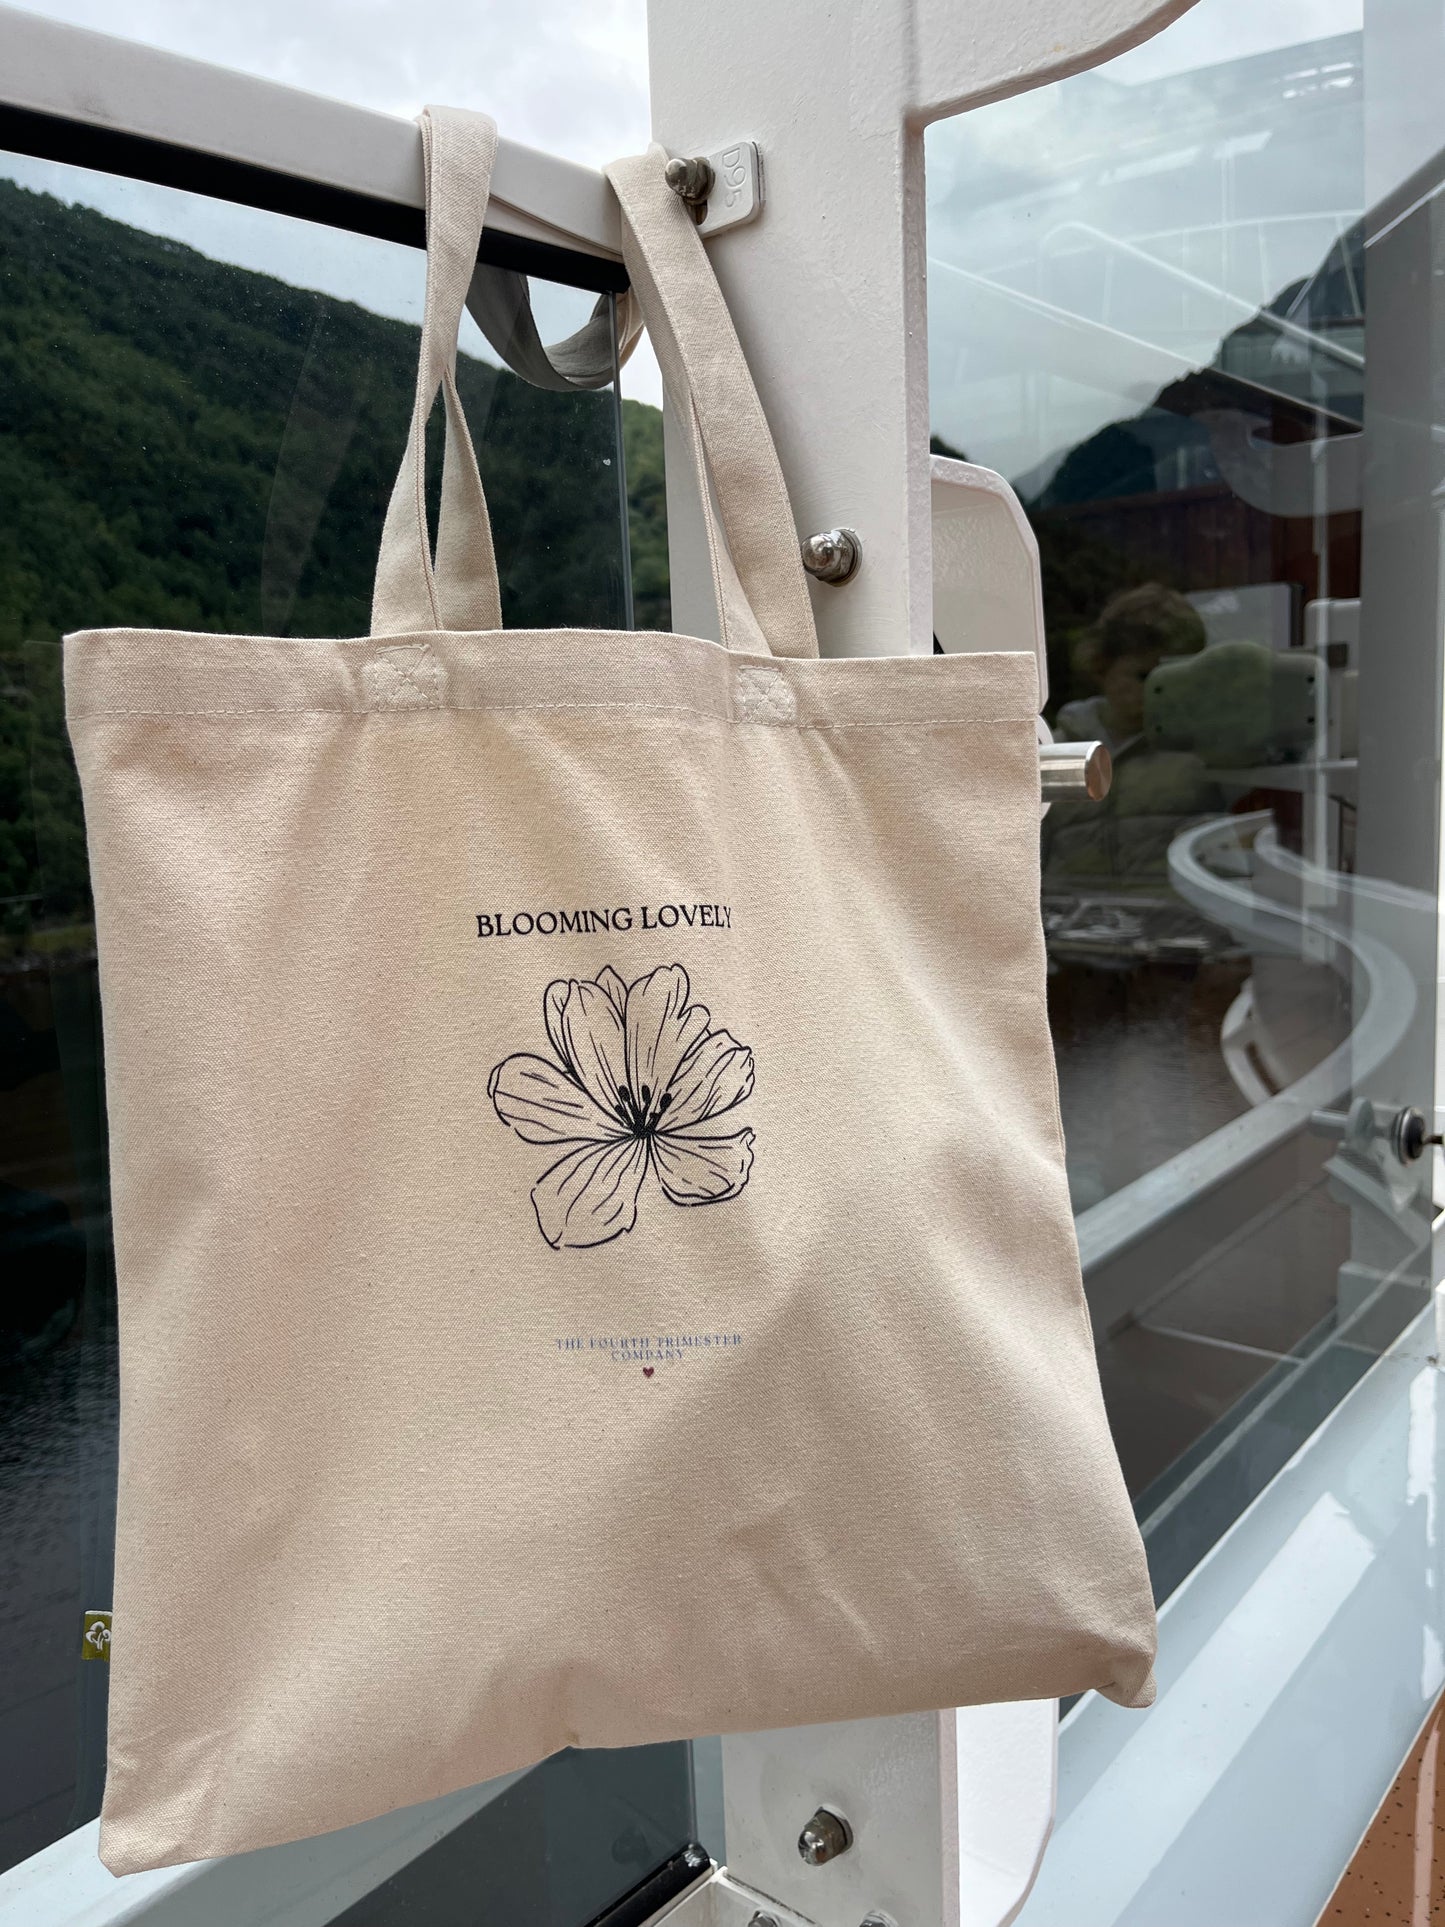 BLOOMING LOVELY- Cotton tote bag